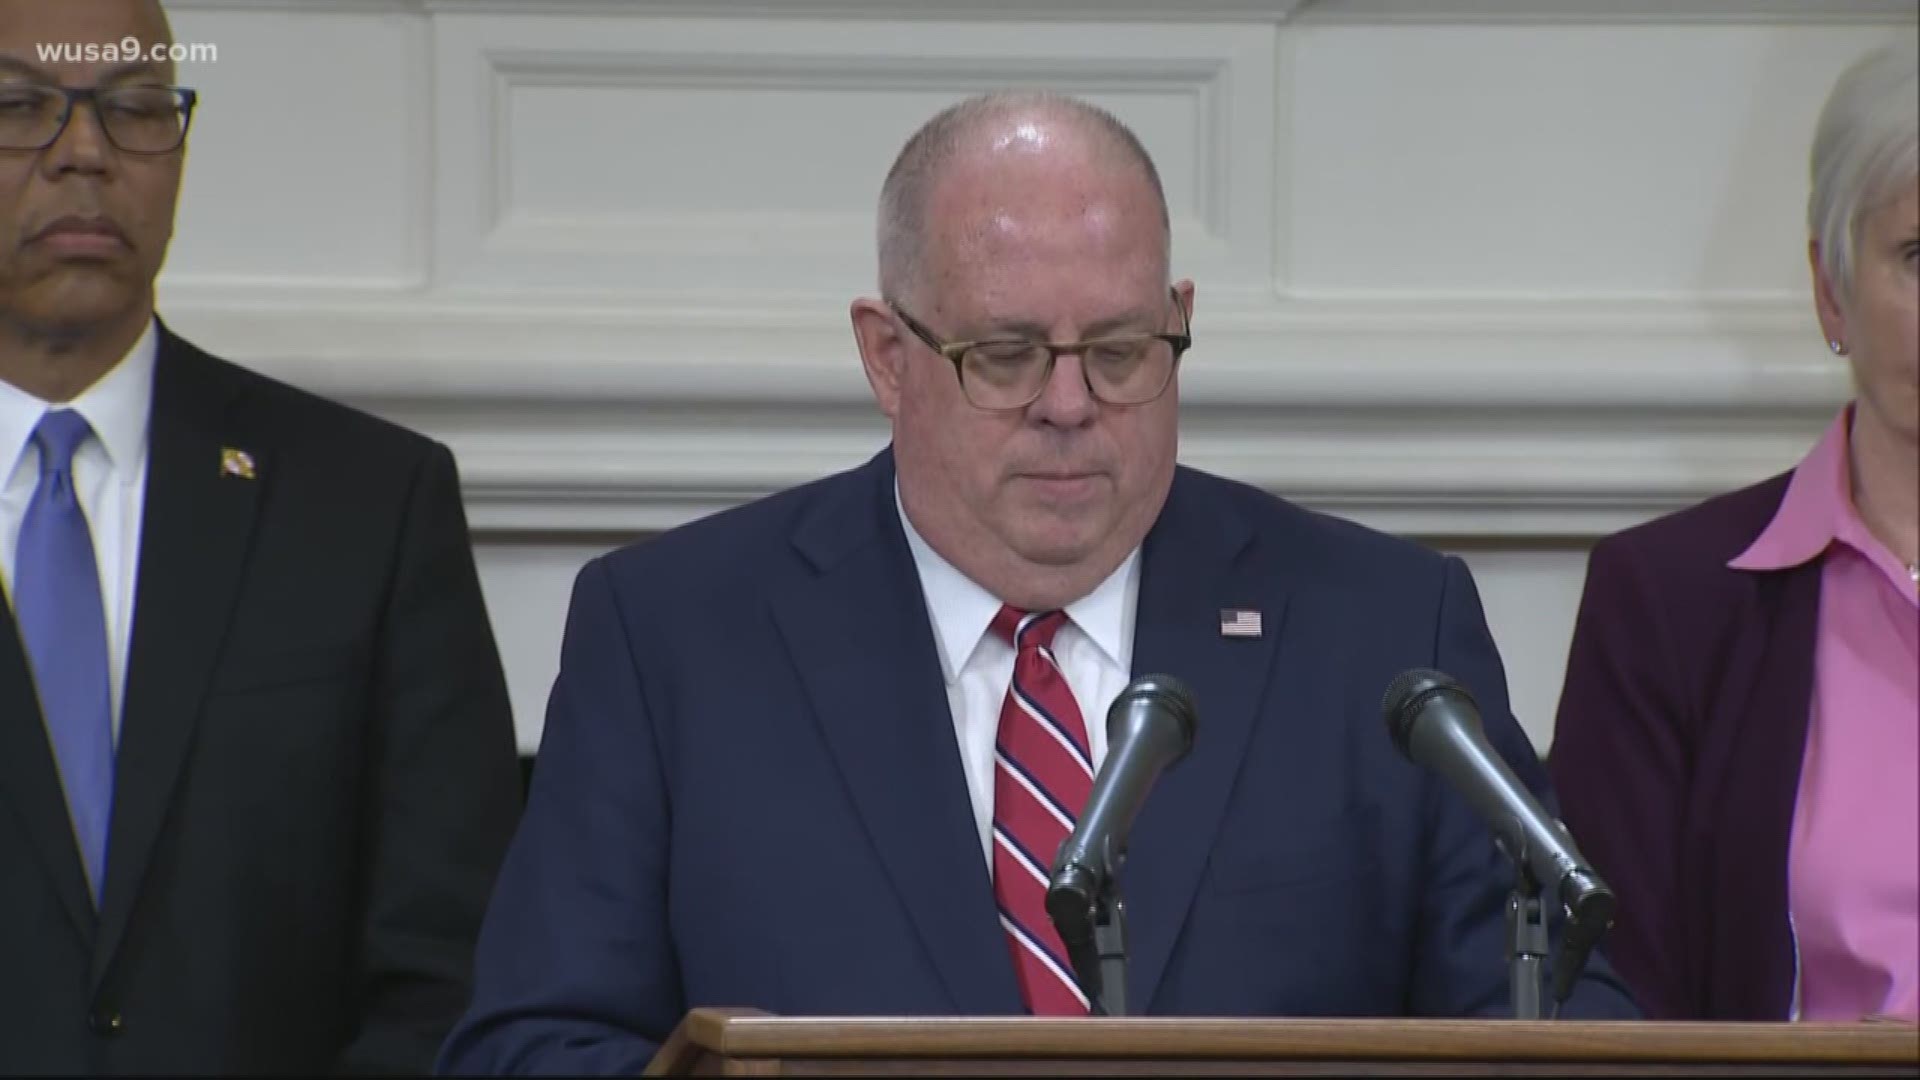 Gov. Larry Hogan declared a state of emergency in Maryland Thursday evening. He said all three patients are currently in good condition.